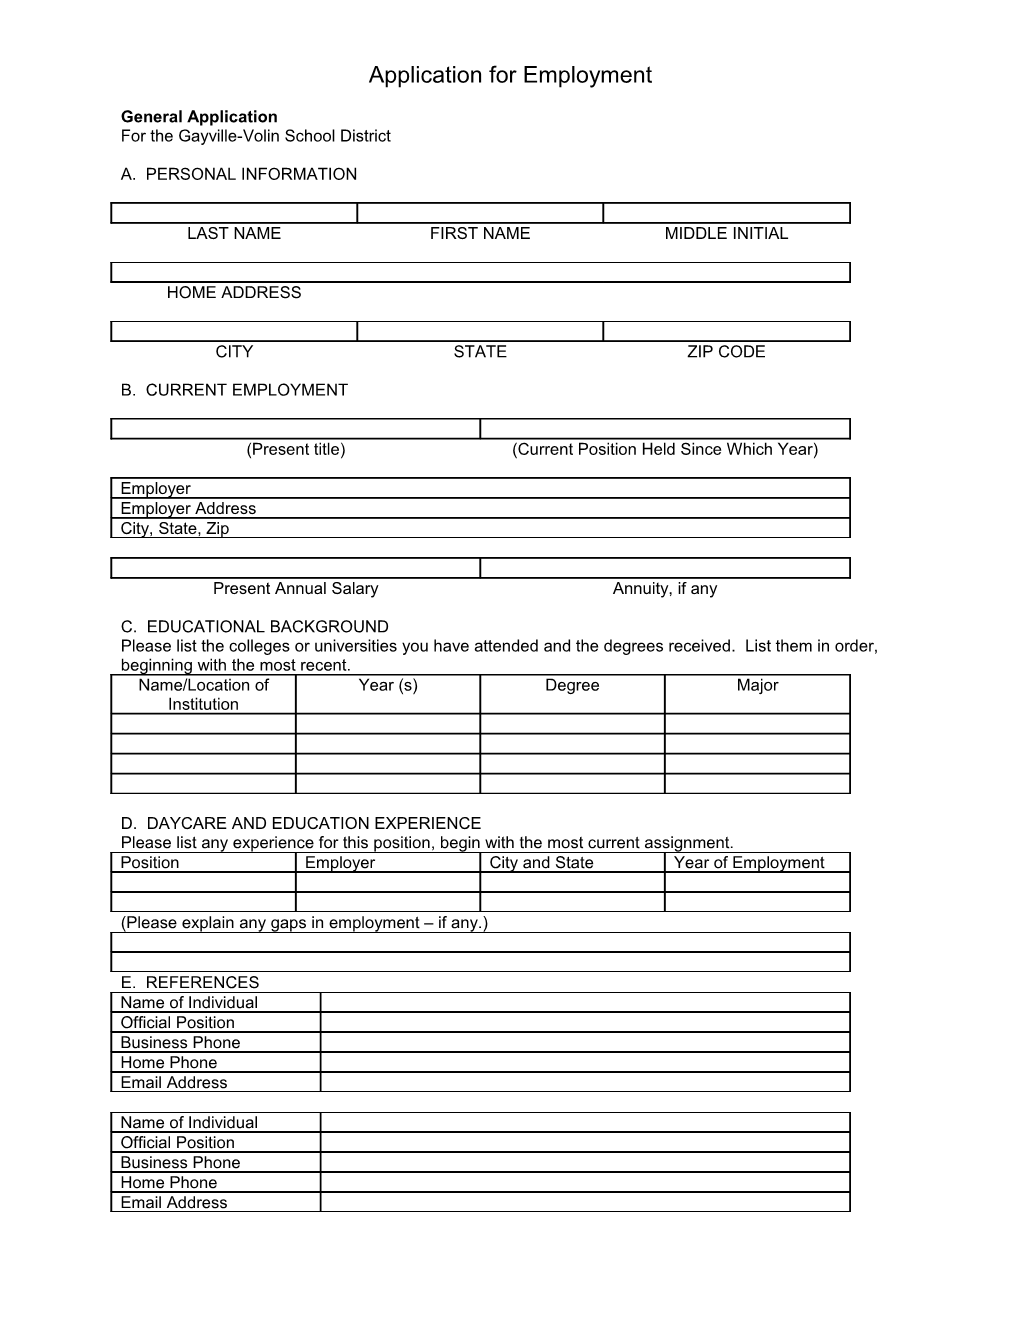 Application for Employment s130